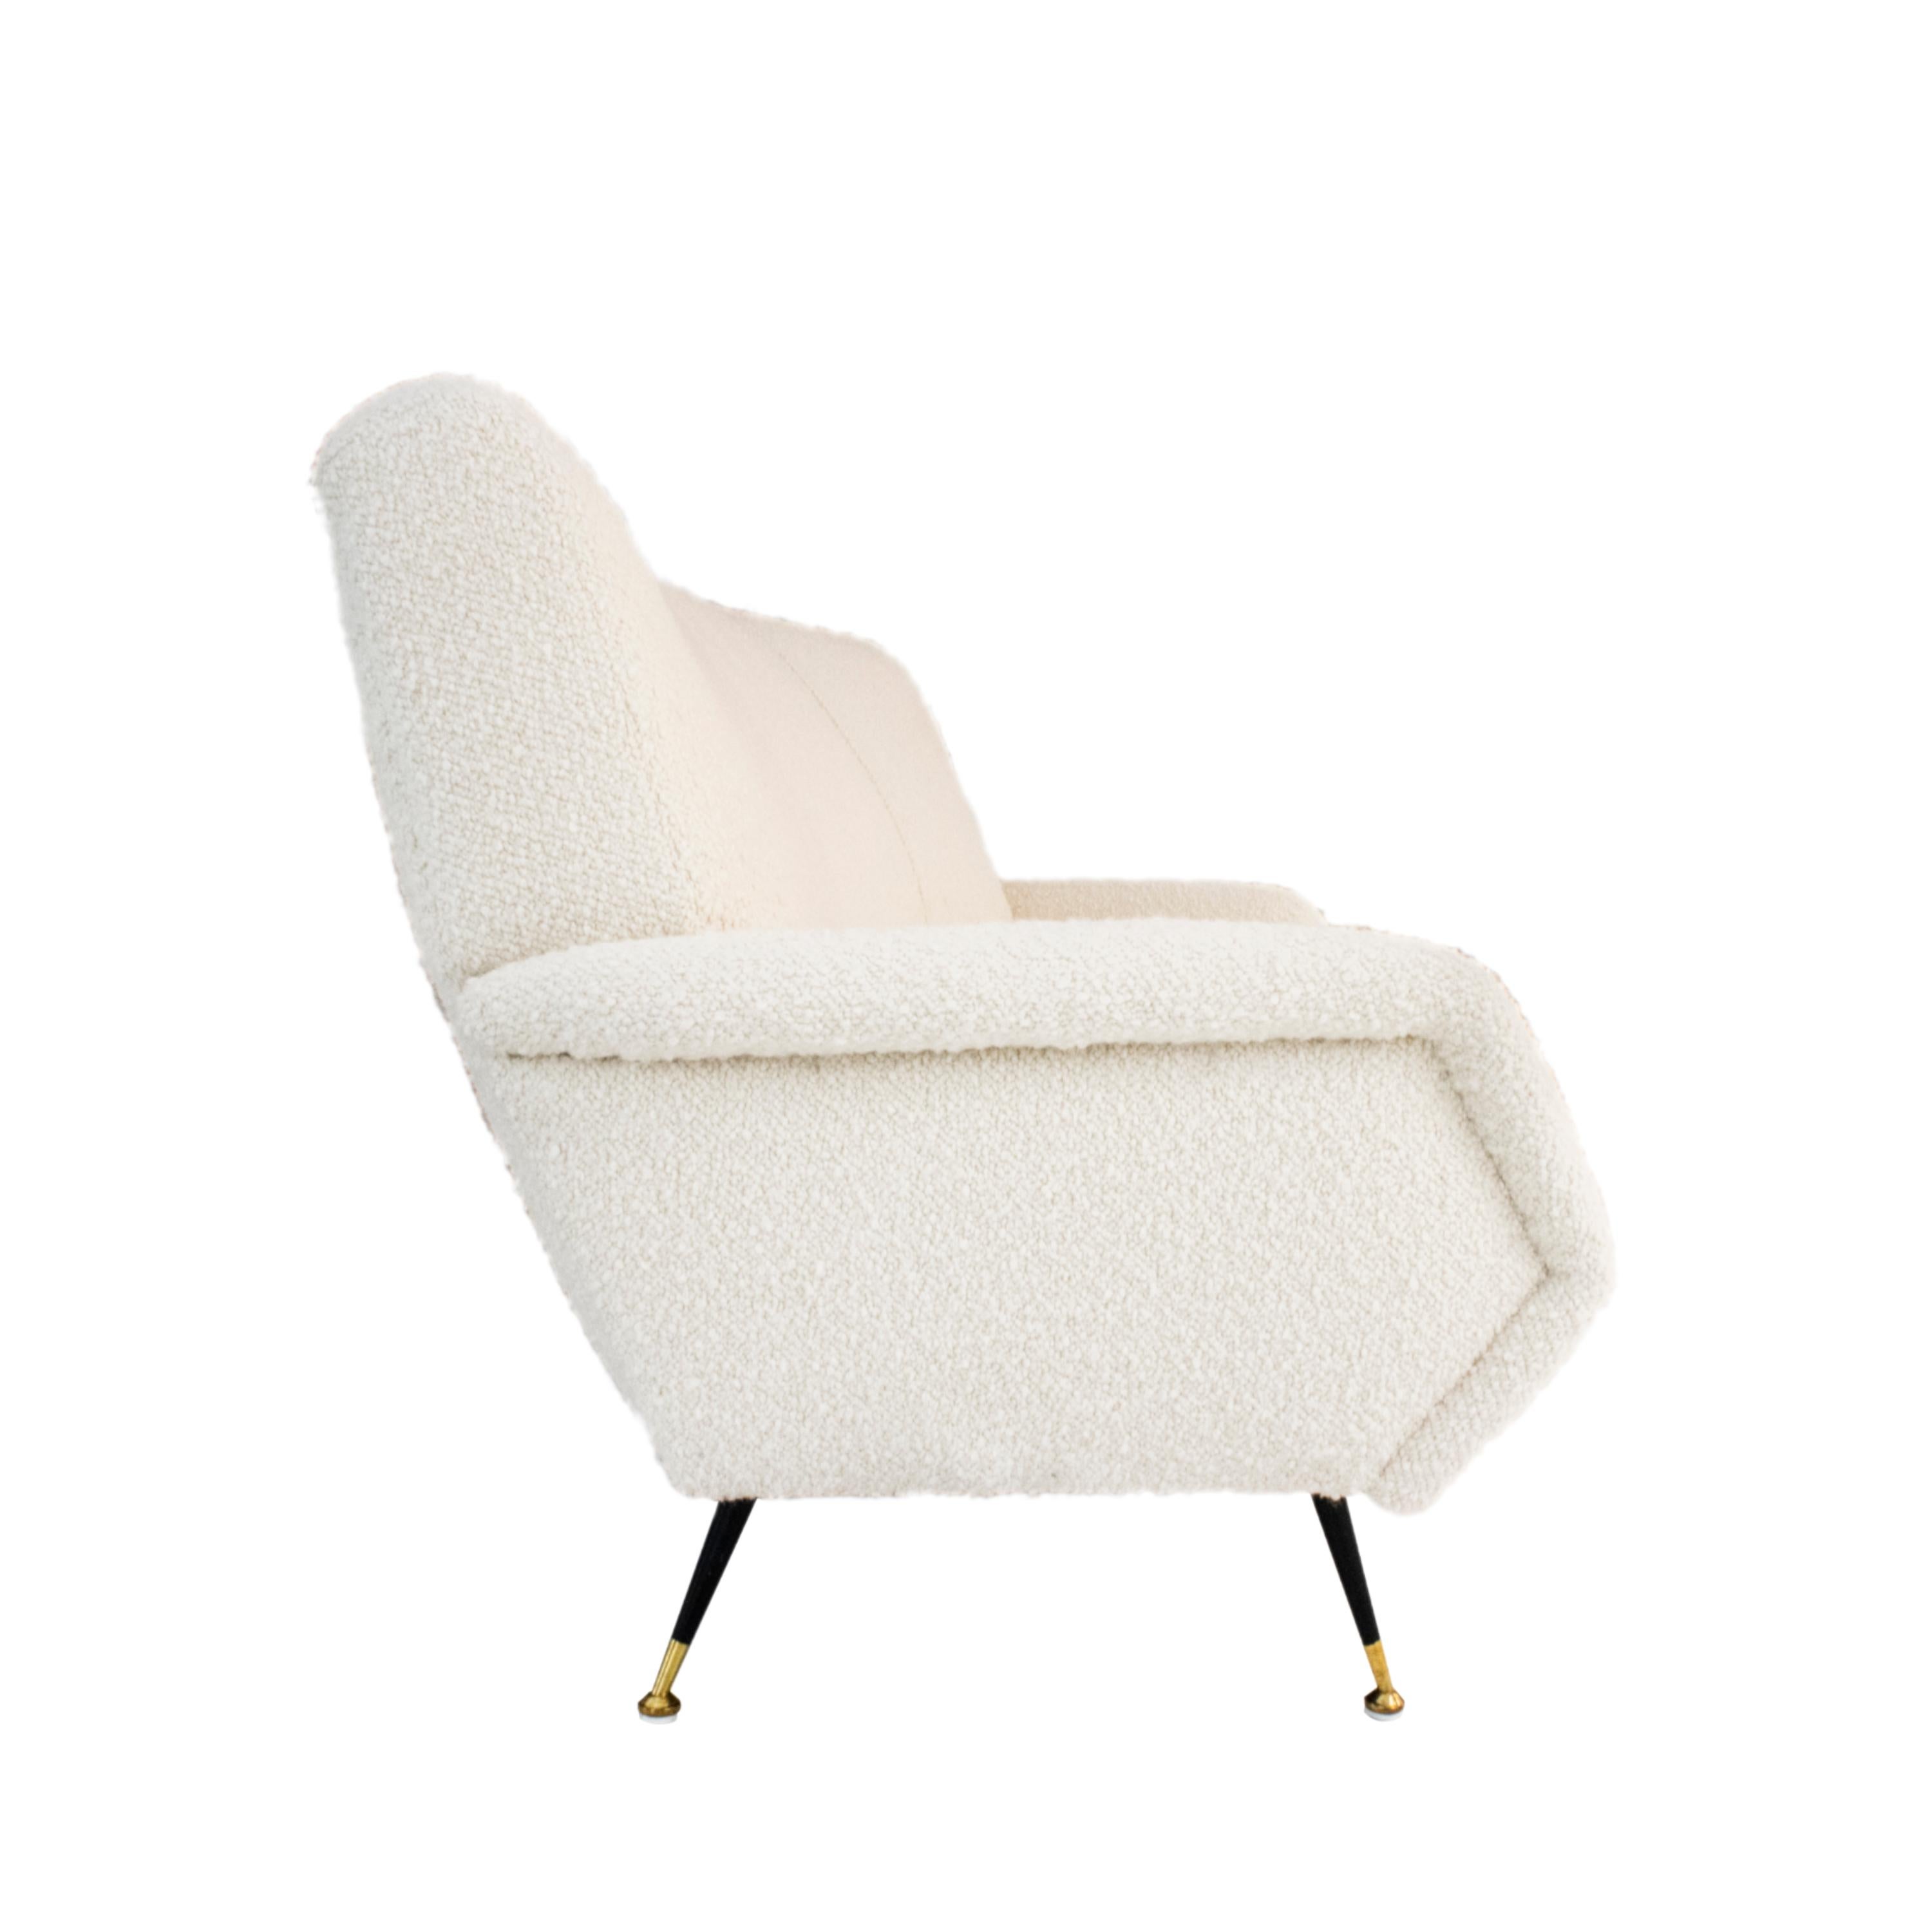 Mid-Century Modern Mid-Century White Boucle Curved Sofa with Five Legs, Italy, 1950 For Sale